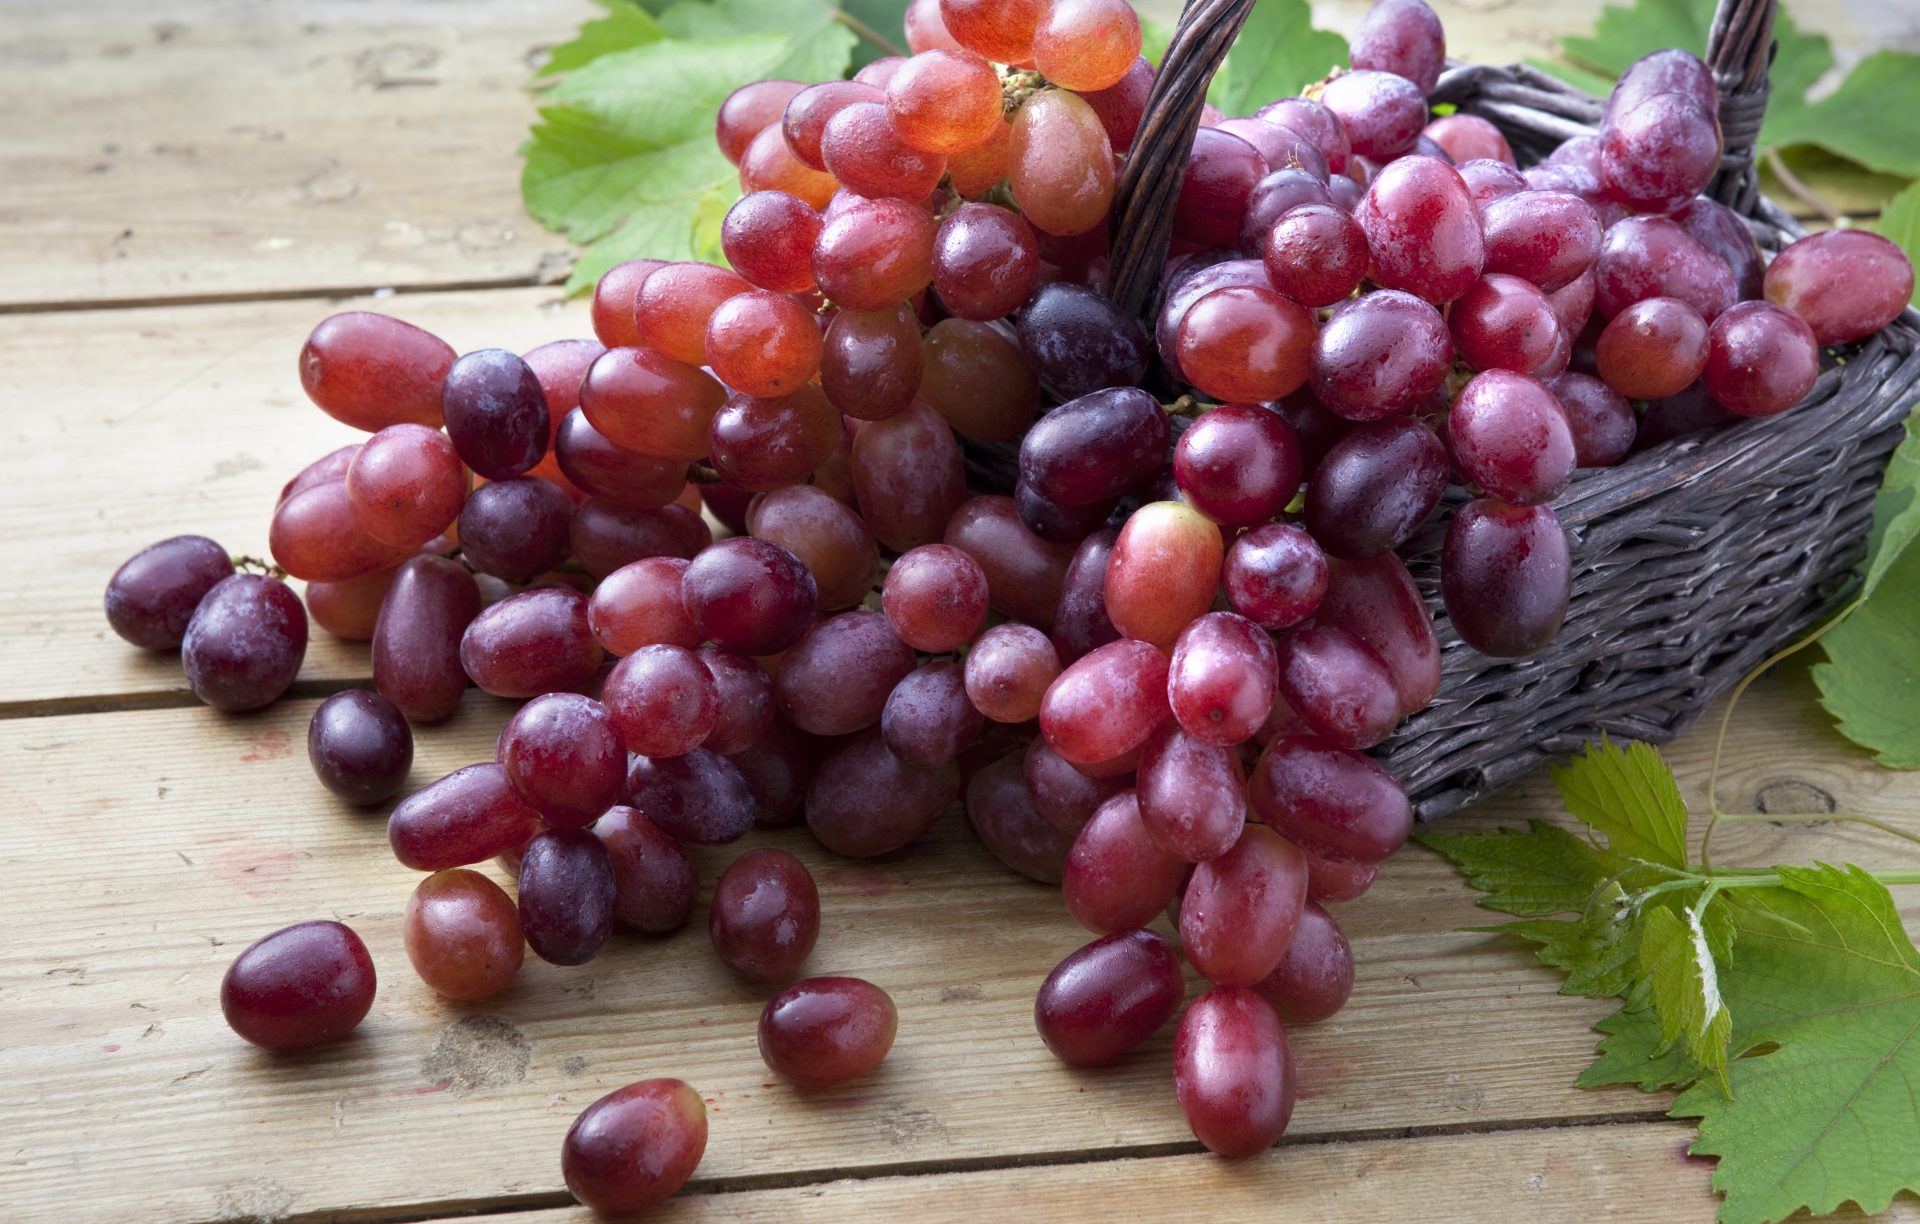 There Are Numerous Health Benefits Associated With Red Grapes